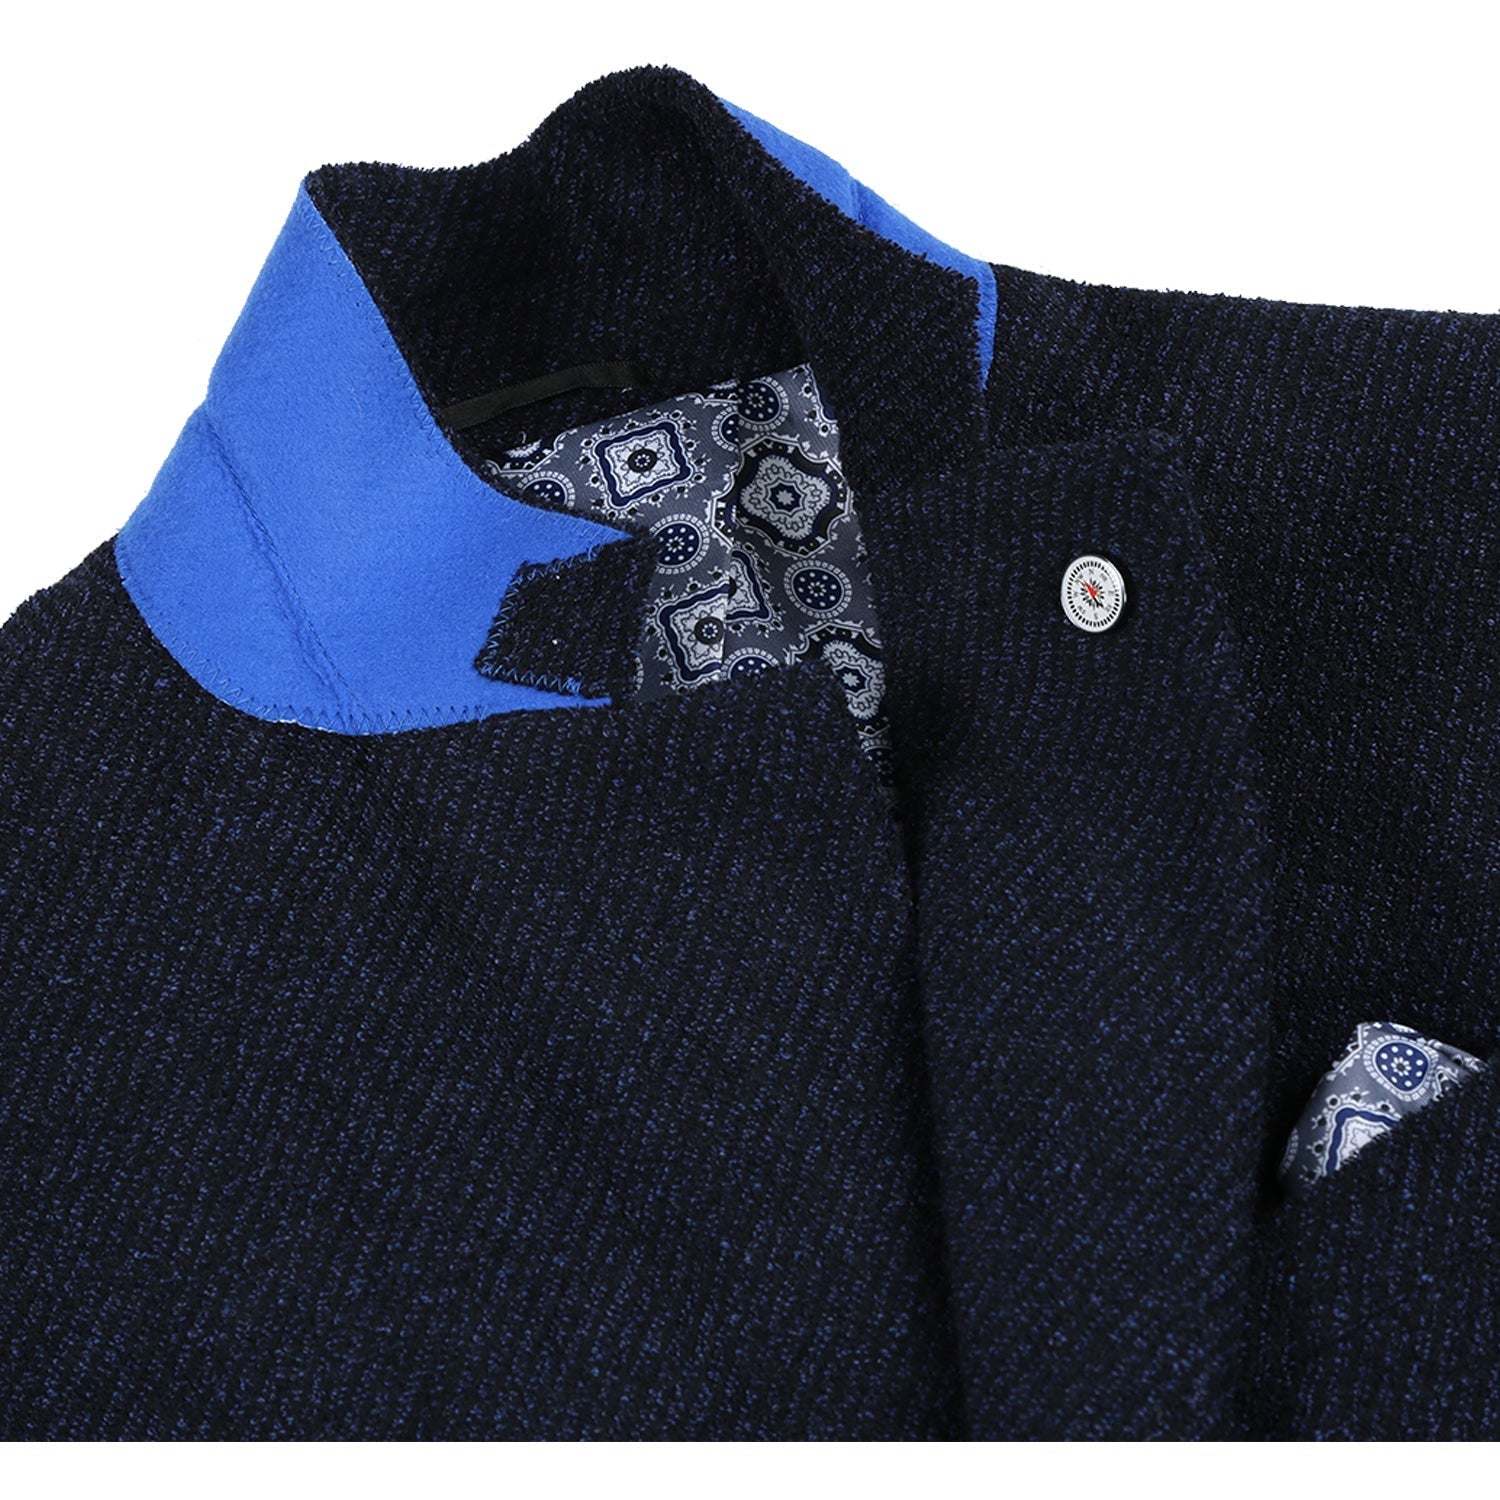 Single Breasted SLIM FIT Half Canvas Knit Soft Jacket in Navy Mélange (Short, Regular, and Long Available) by Pelago